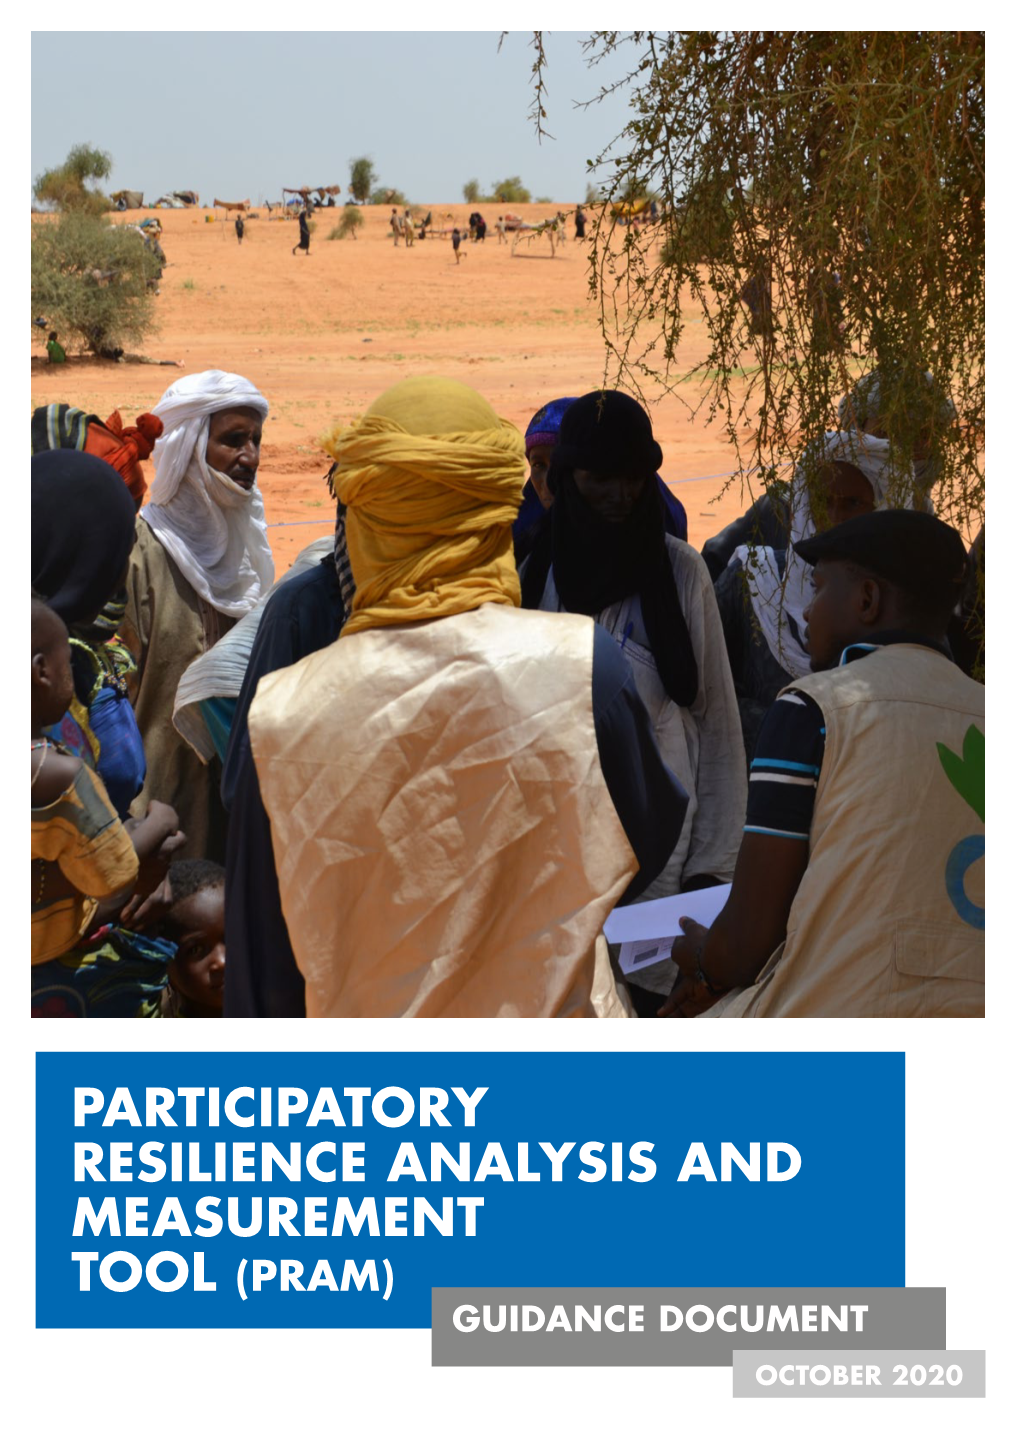 Participatory Resilience Analysis and Measurement Tool (Pram) Guidance Document October 2020 Contents Section 1 Section 2 Section 3 Annexes